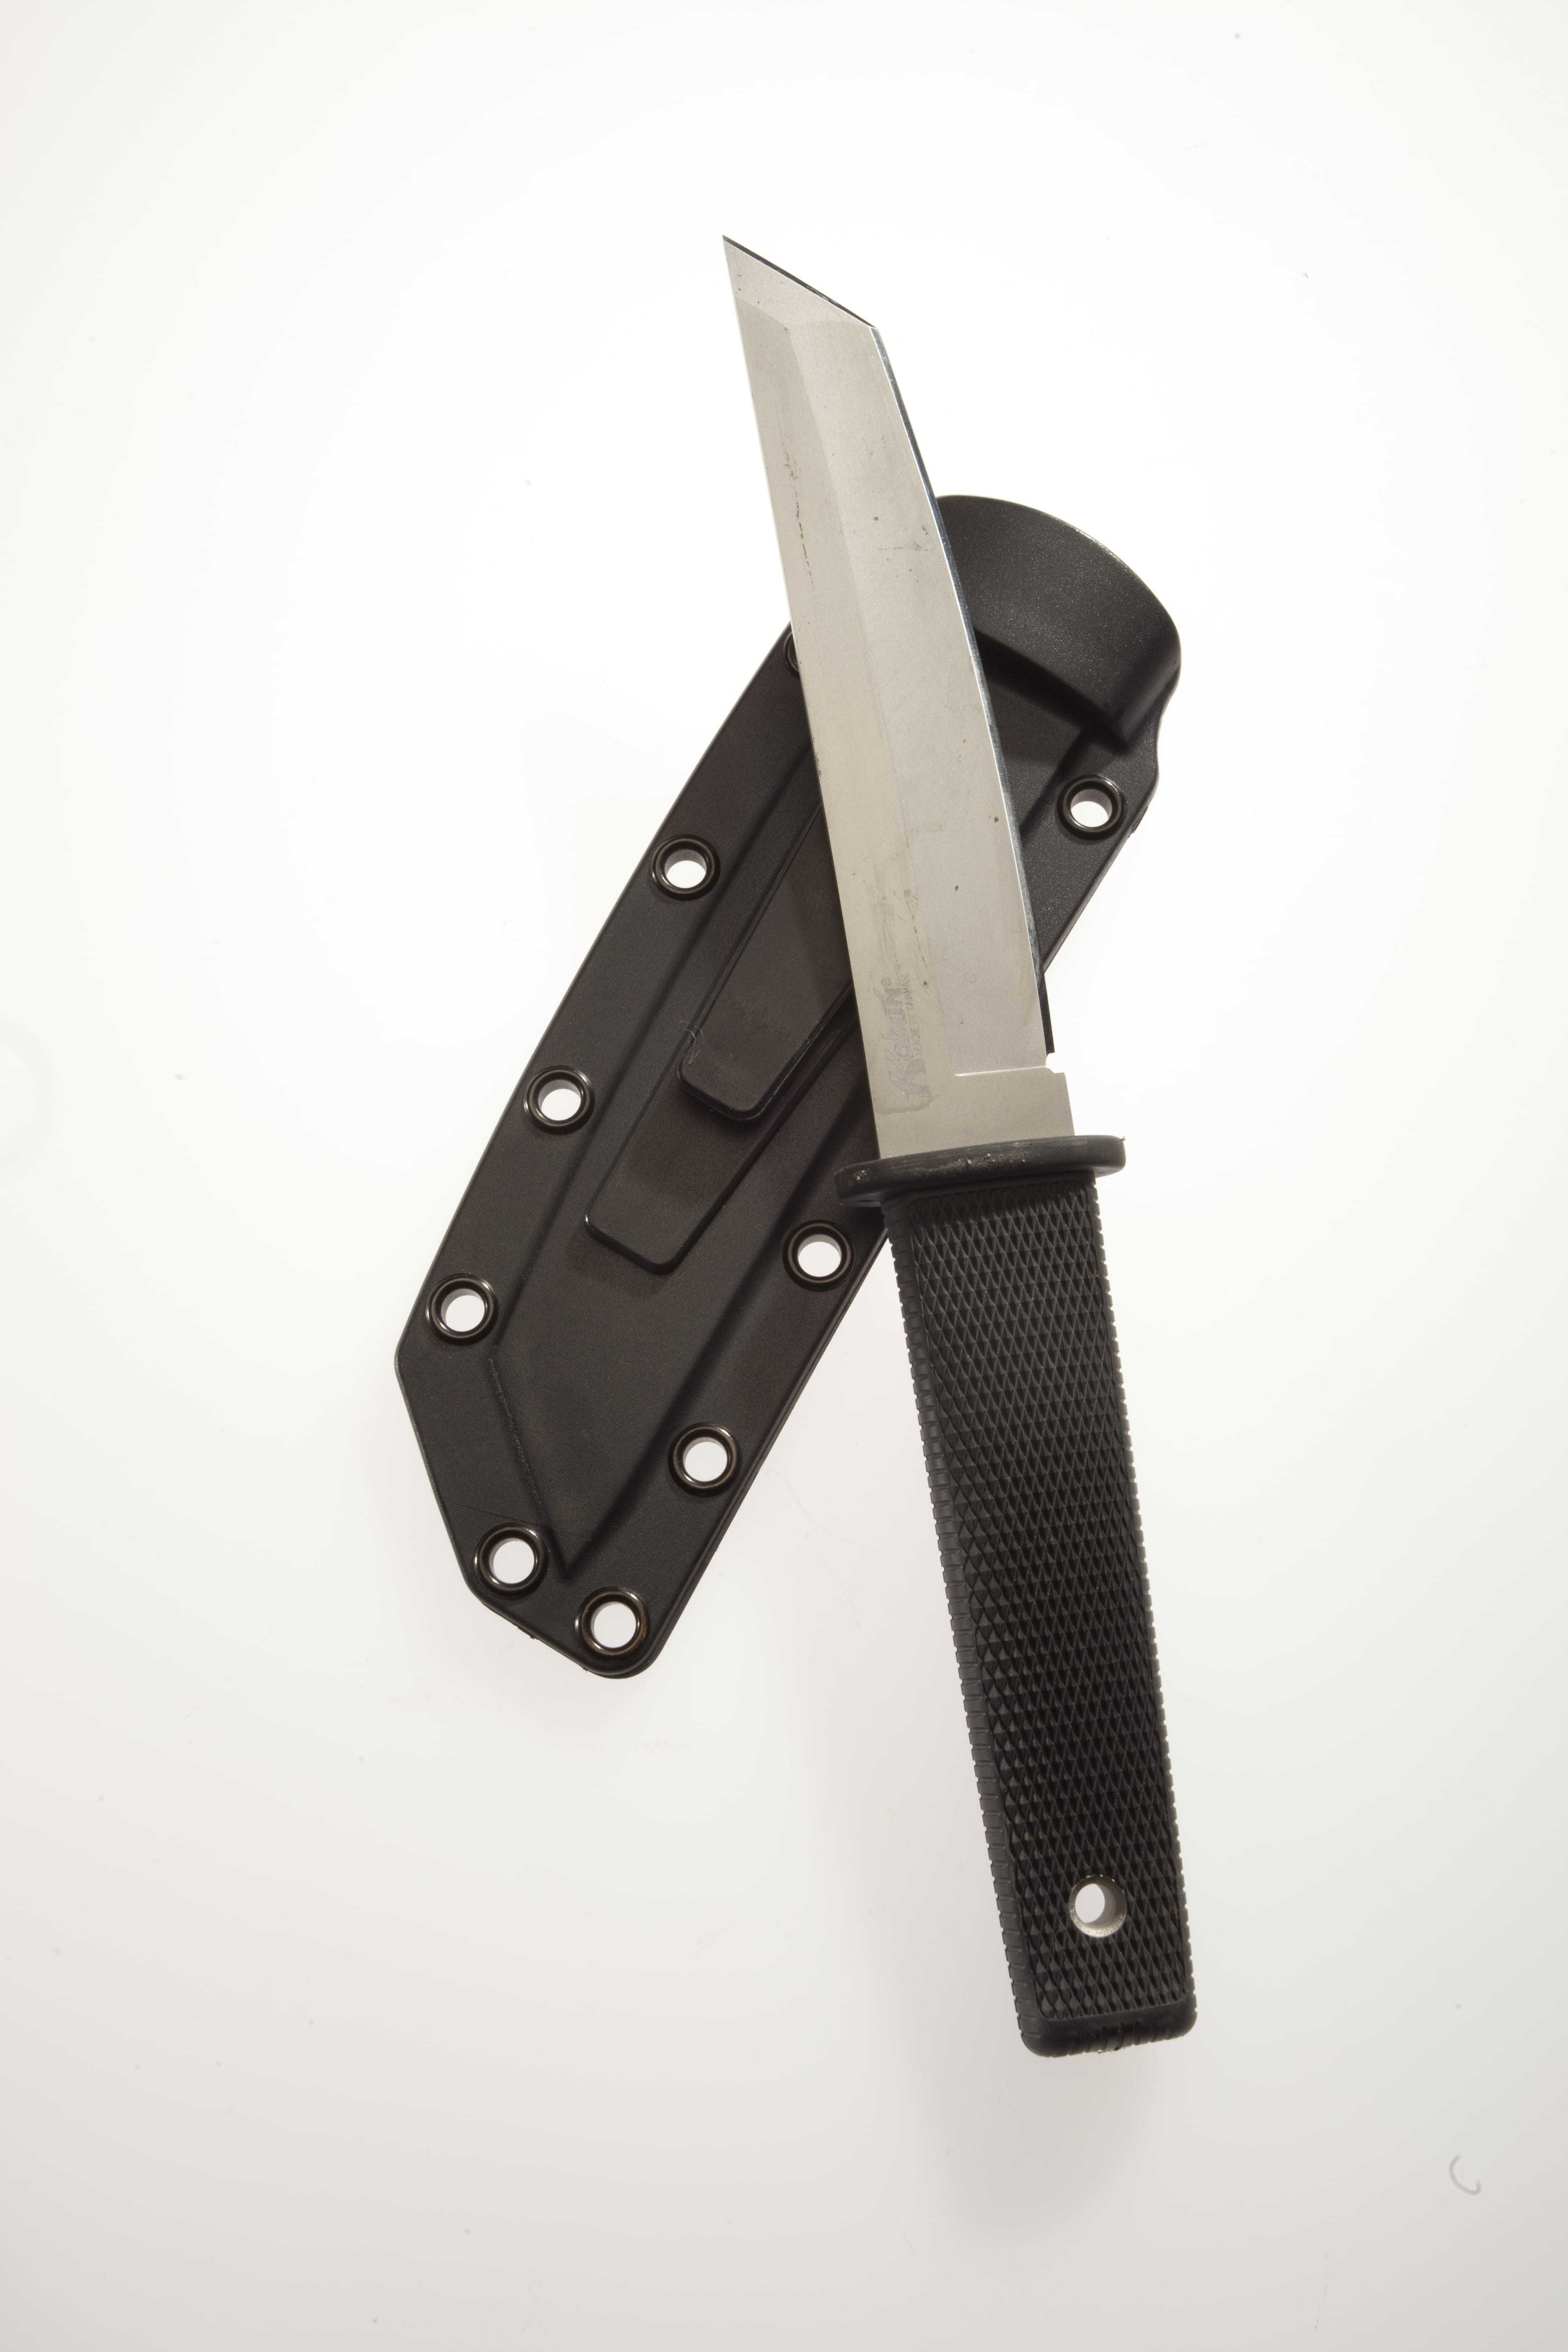 A knife with a black handle resting on top of a matching blade cover